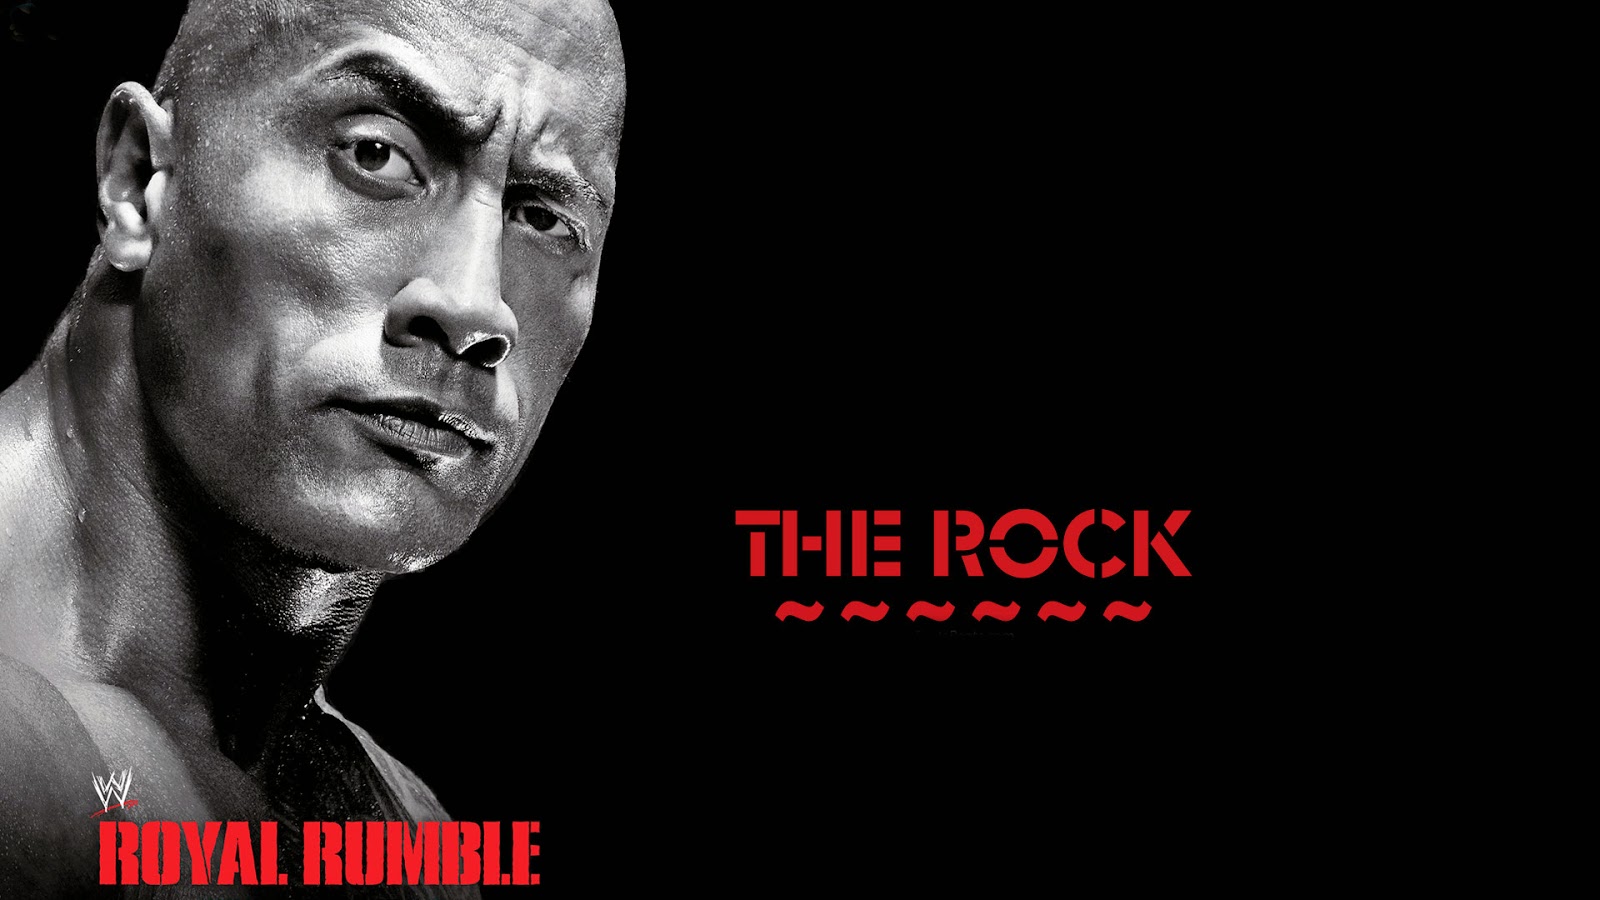 dwayne the rock johnson hd wallpapers,chin,movie,font,poster,album cover